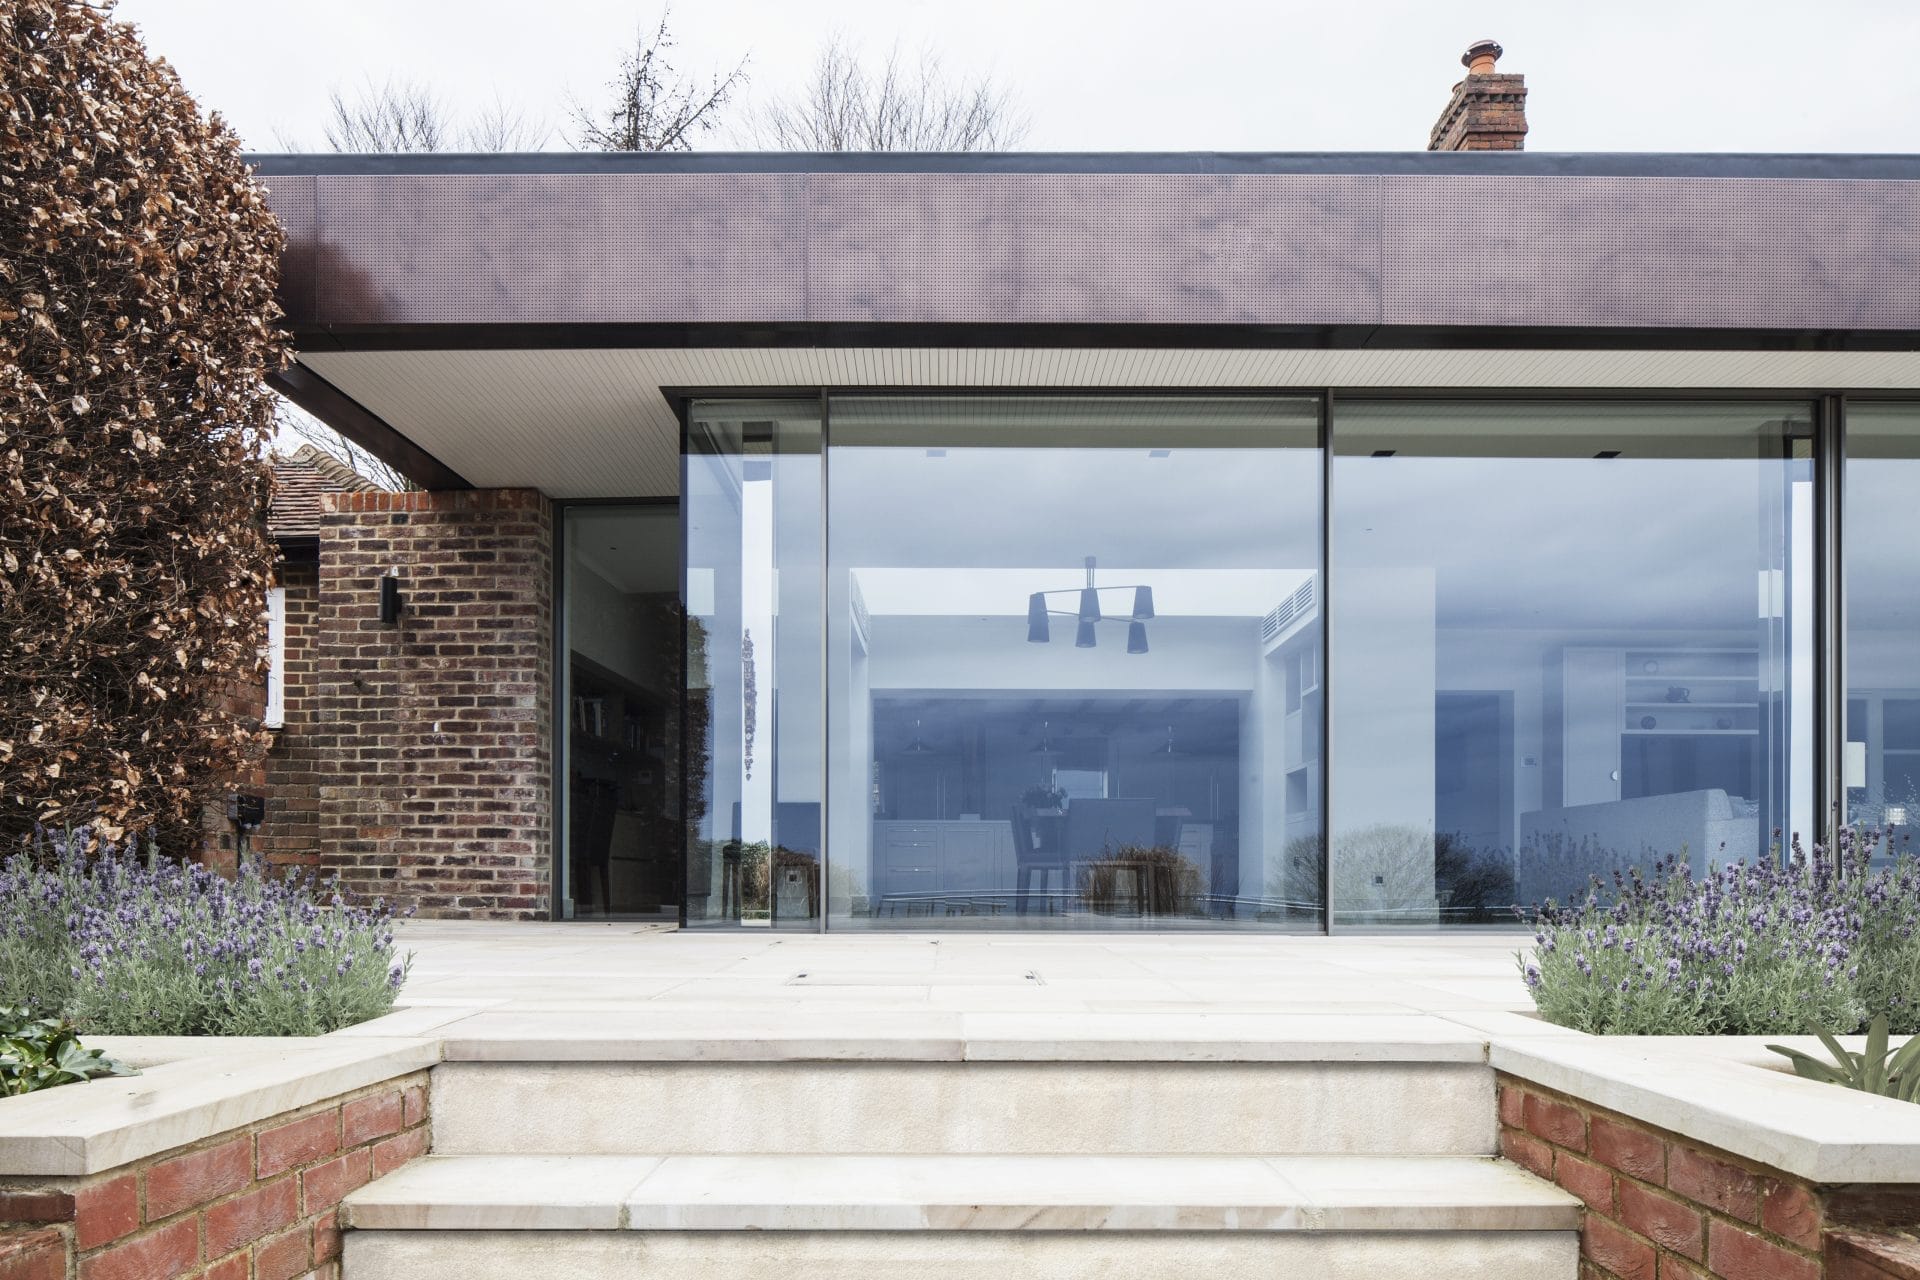 A modern residential home extension featuring glass walls and steps. Stickland Wright Architecture and Interior Design